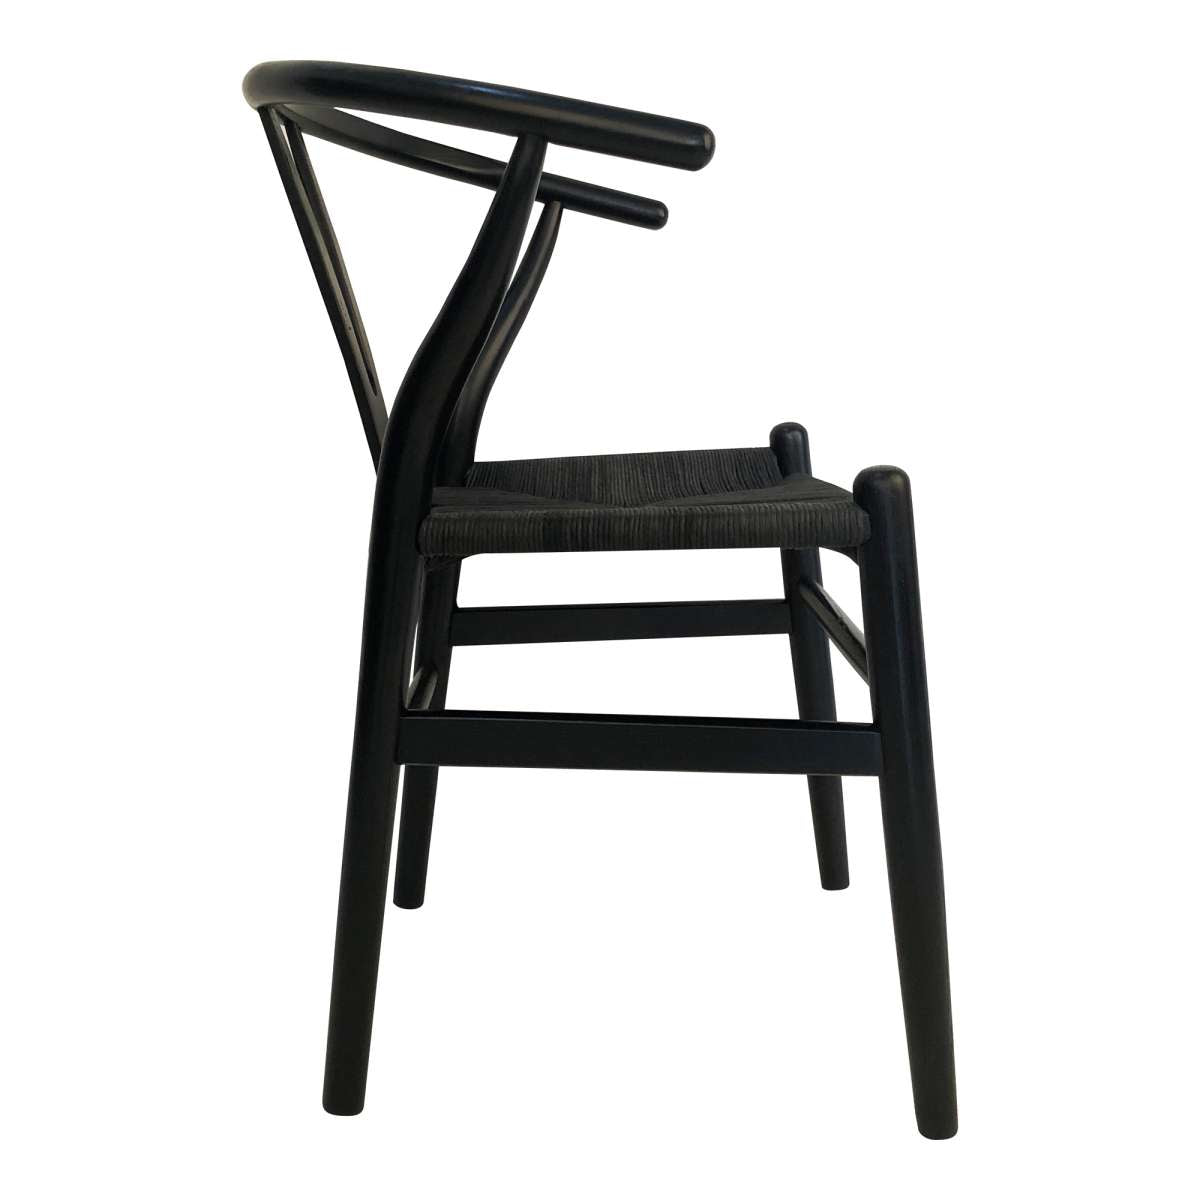 Ventana Dining Chair Black-M2 (Set Of 2) By Moe's Home Collection